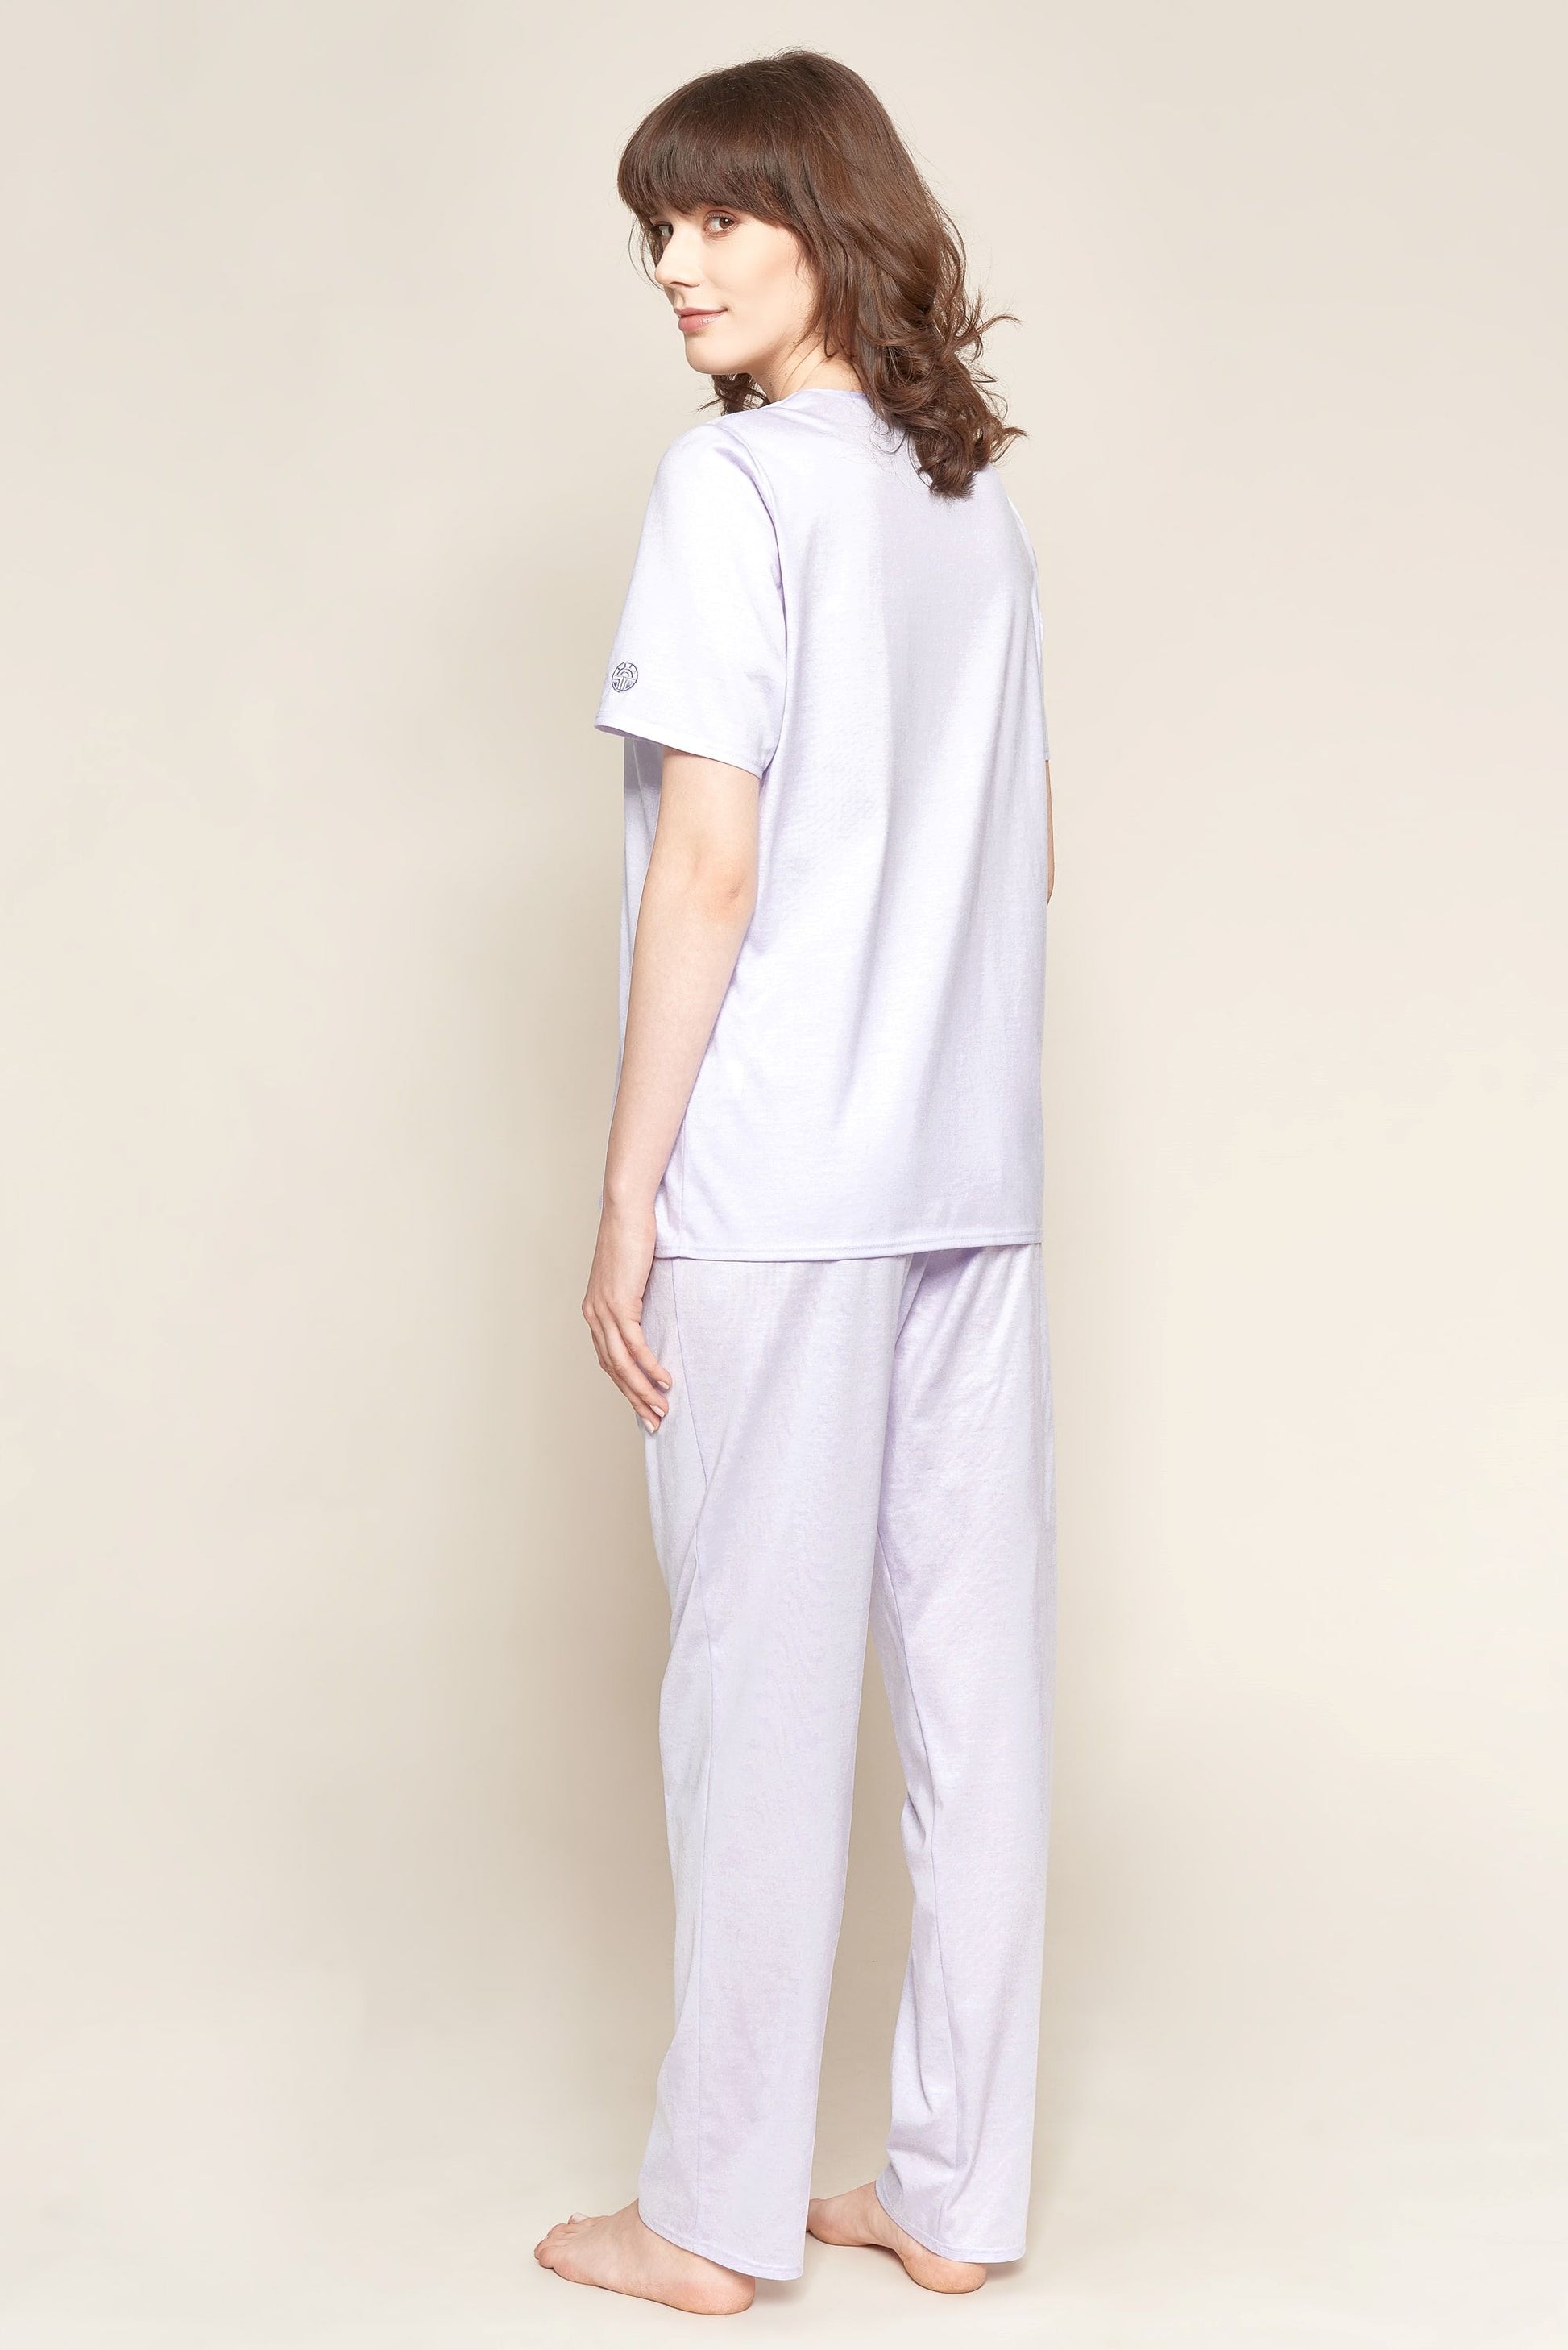 This 100% cotton single-jersey pajama set from Féraud Paris' High Class line is luxuriously soft and lightweight, featuring angular pleats on the front. 